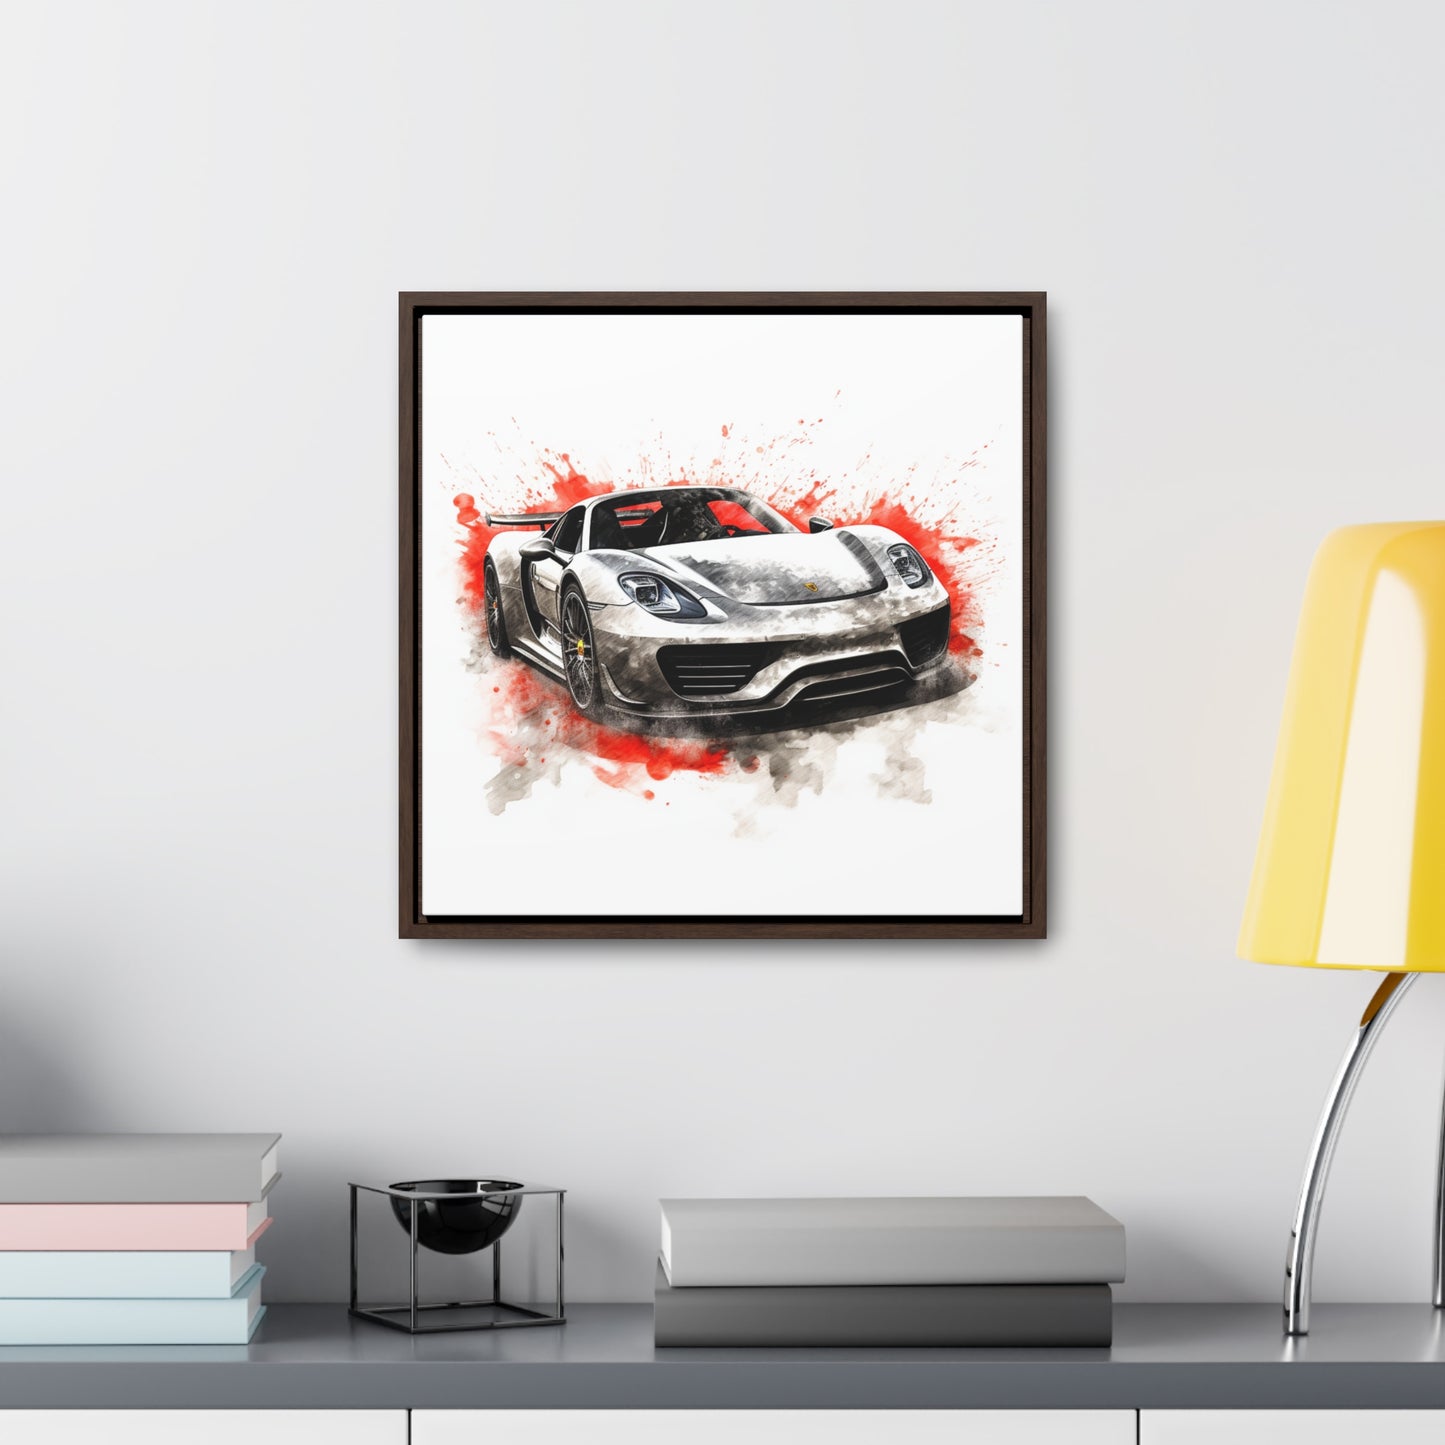 Gallery Canvas Wraps, Square Frame 918 Spyder white background driving fast with water splashing 4